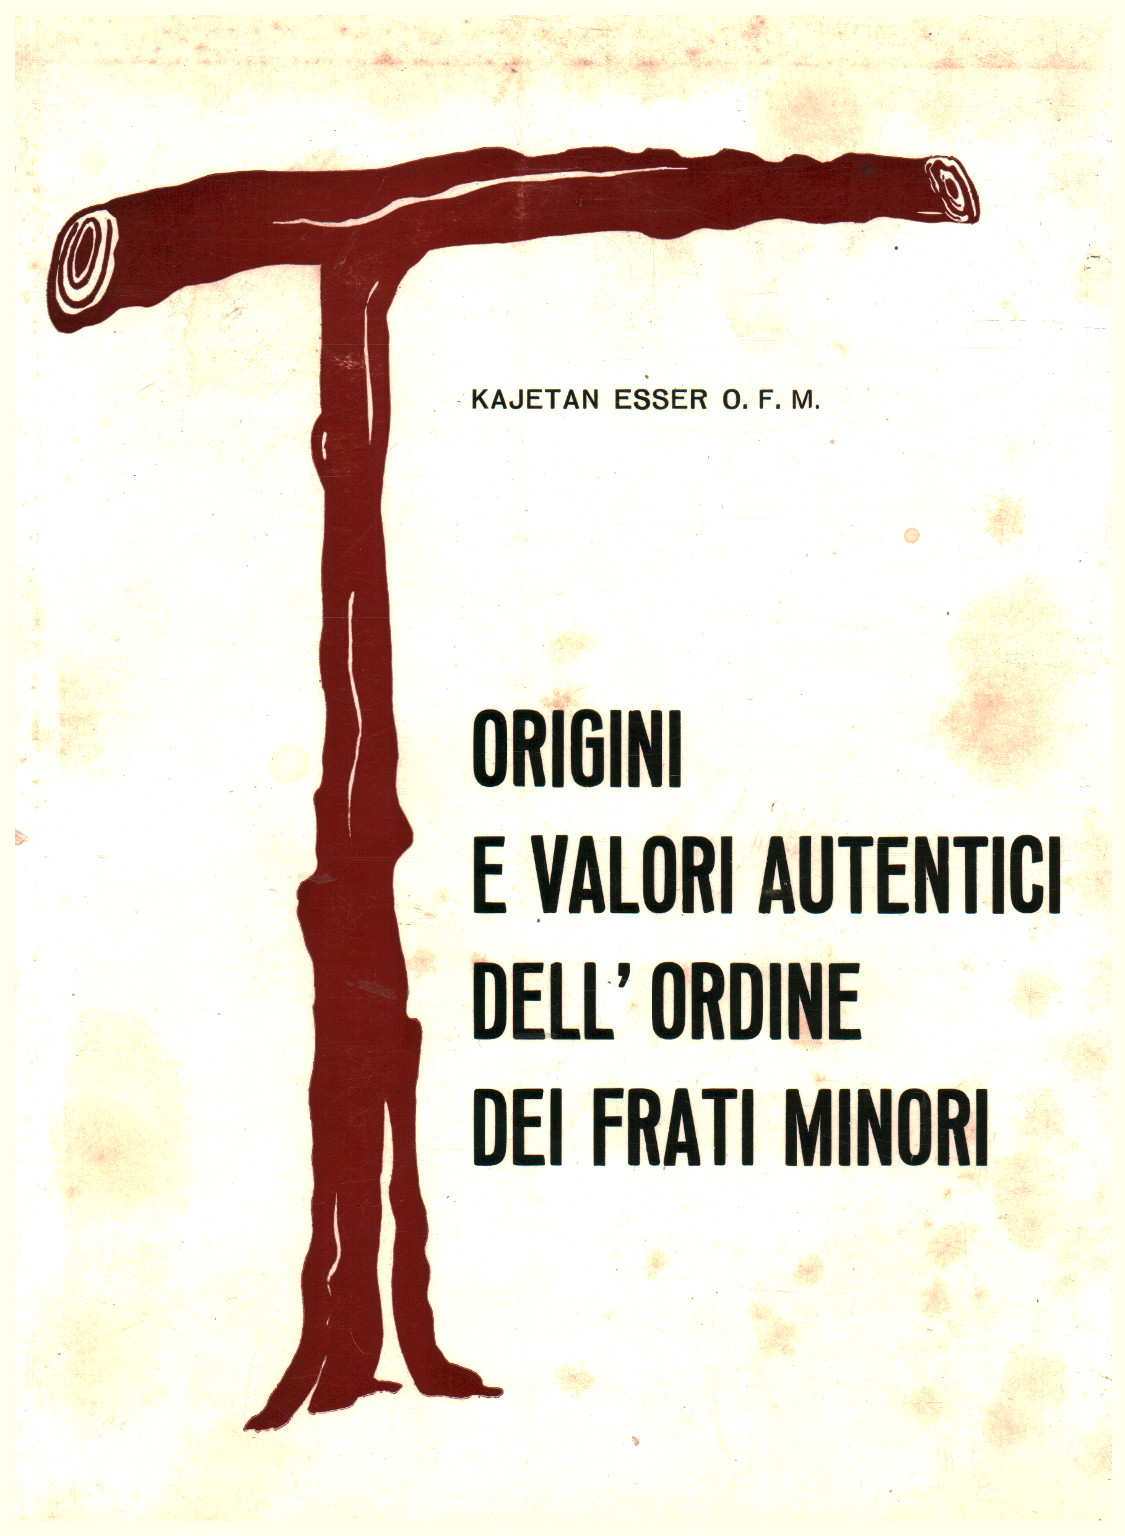 Origins and authentic values of the order of friars, Kajetan Esser Ofm